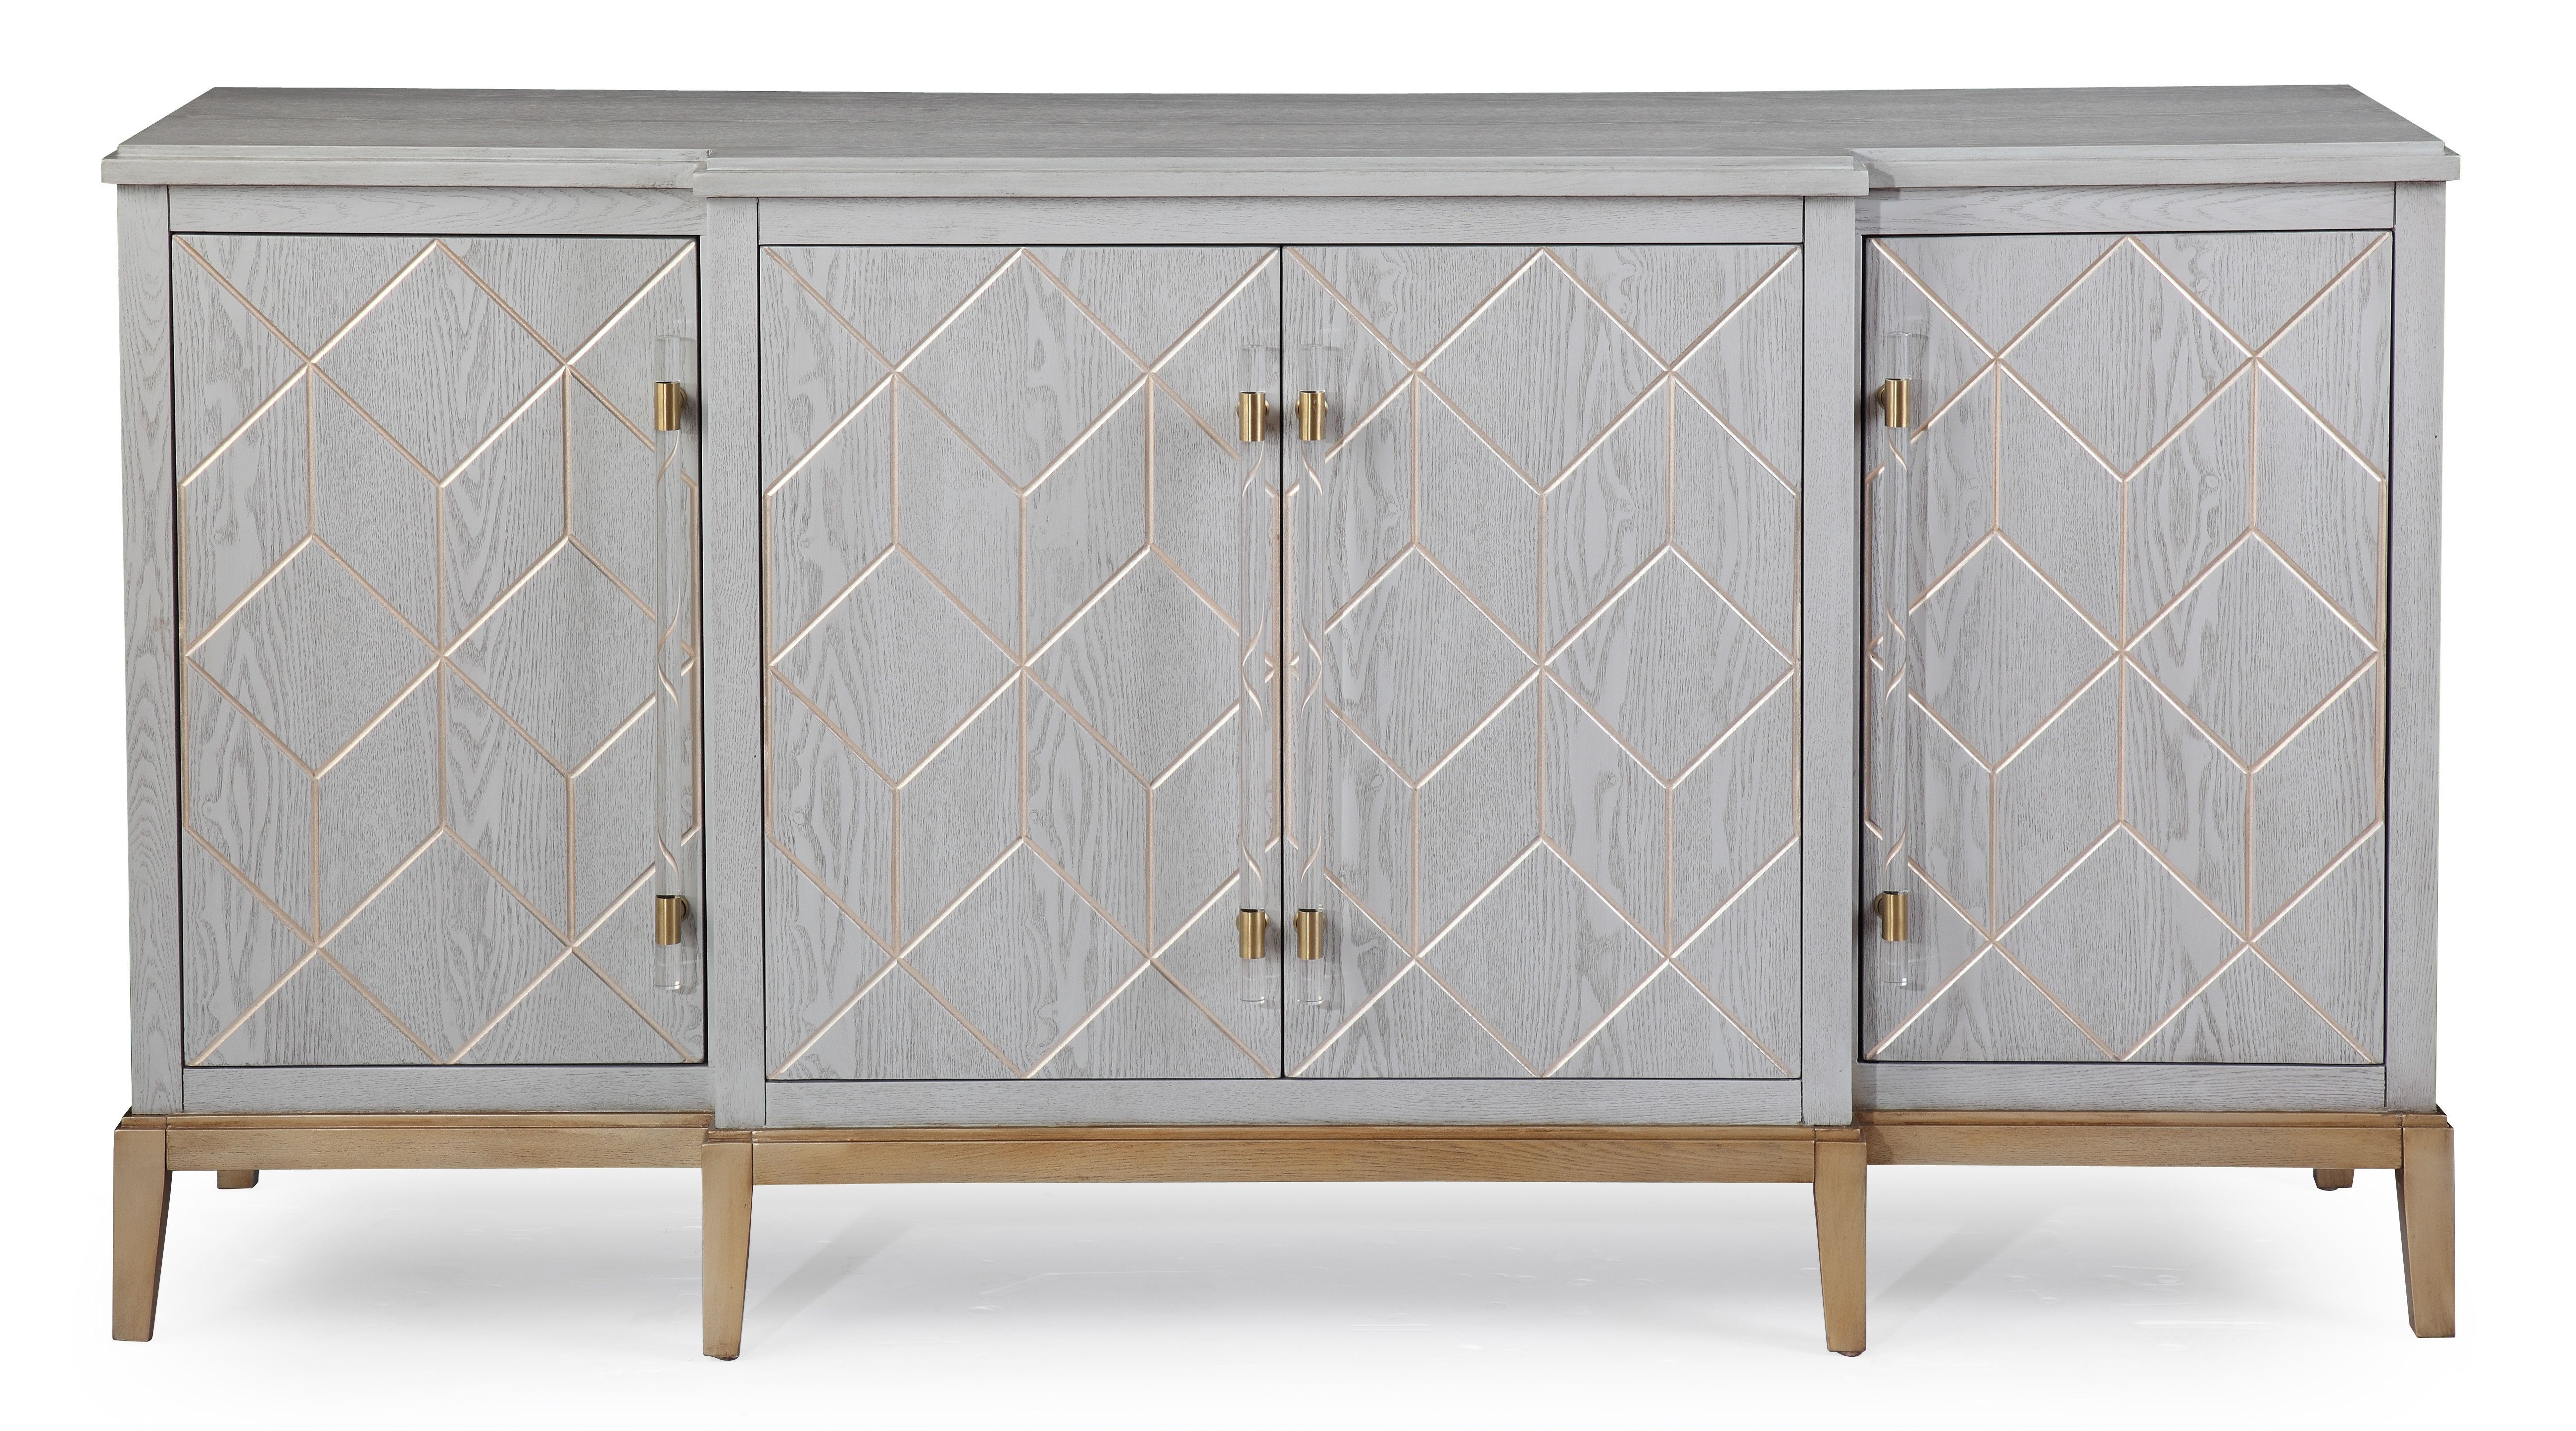 Cabinet Equipped Sideboards & Buffets | Joss & Main Throughout Most Recently Released Whitten Sideboards (View 16 of 20)